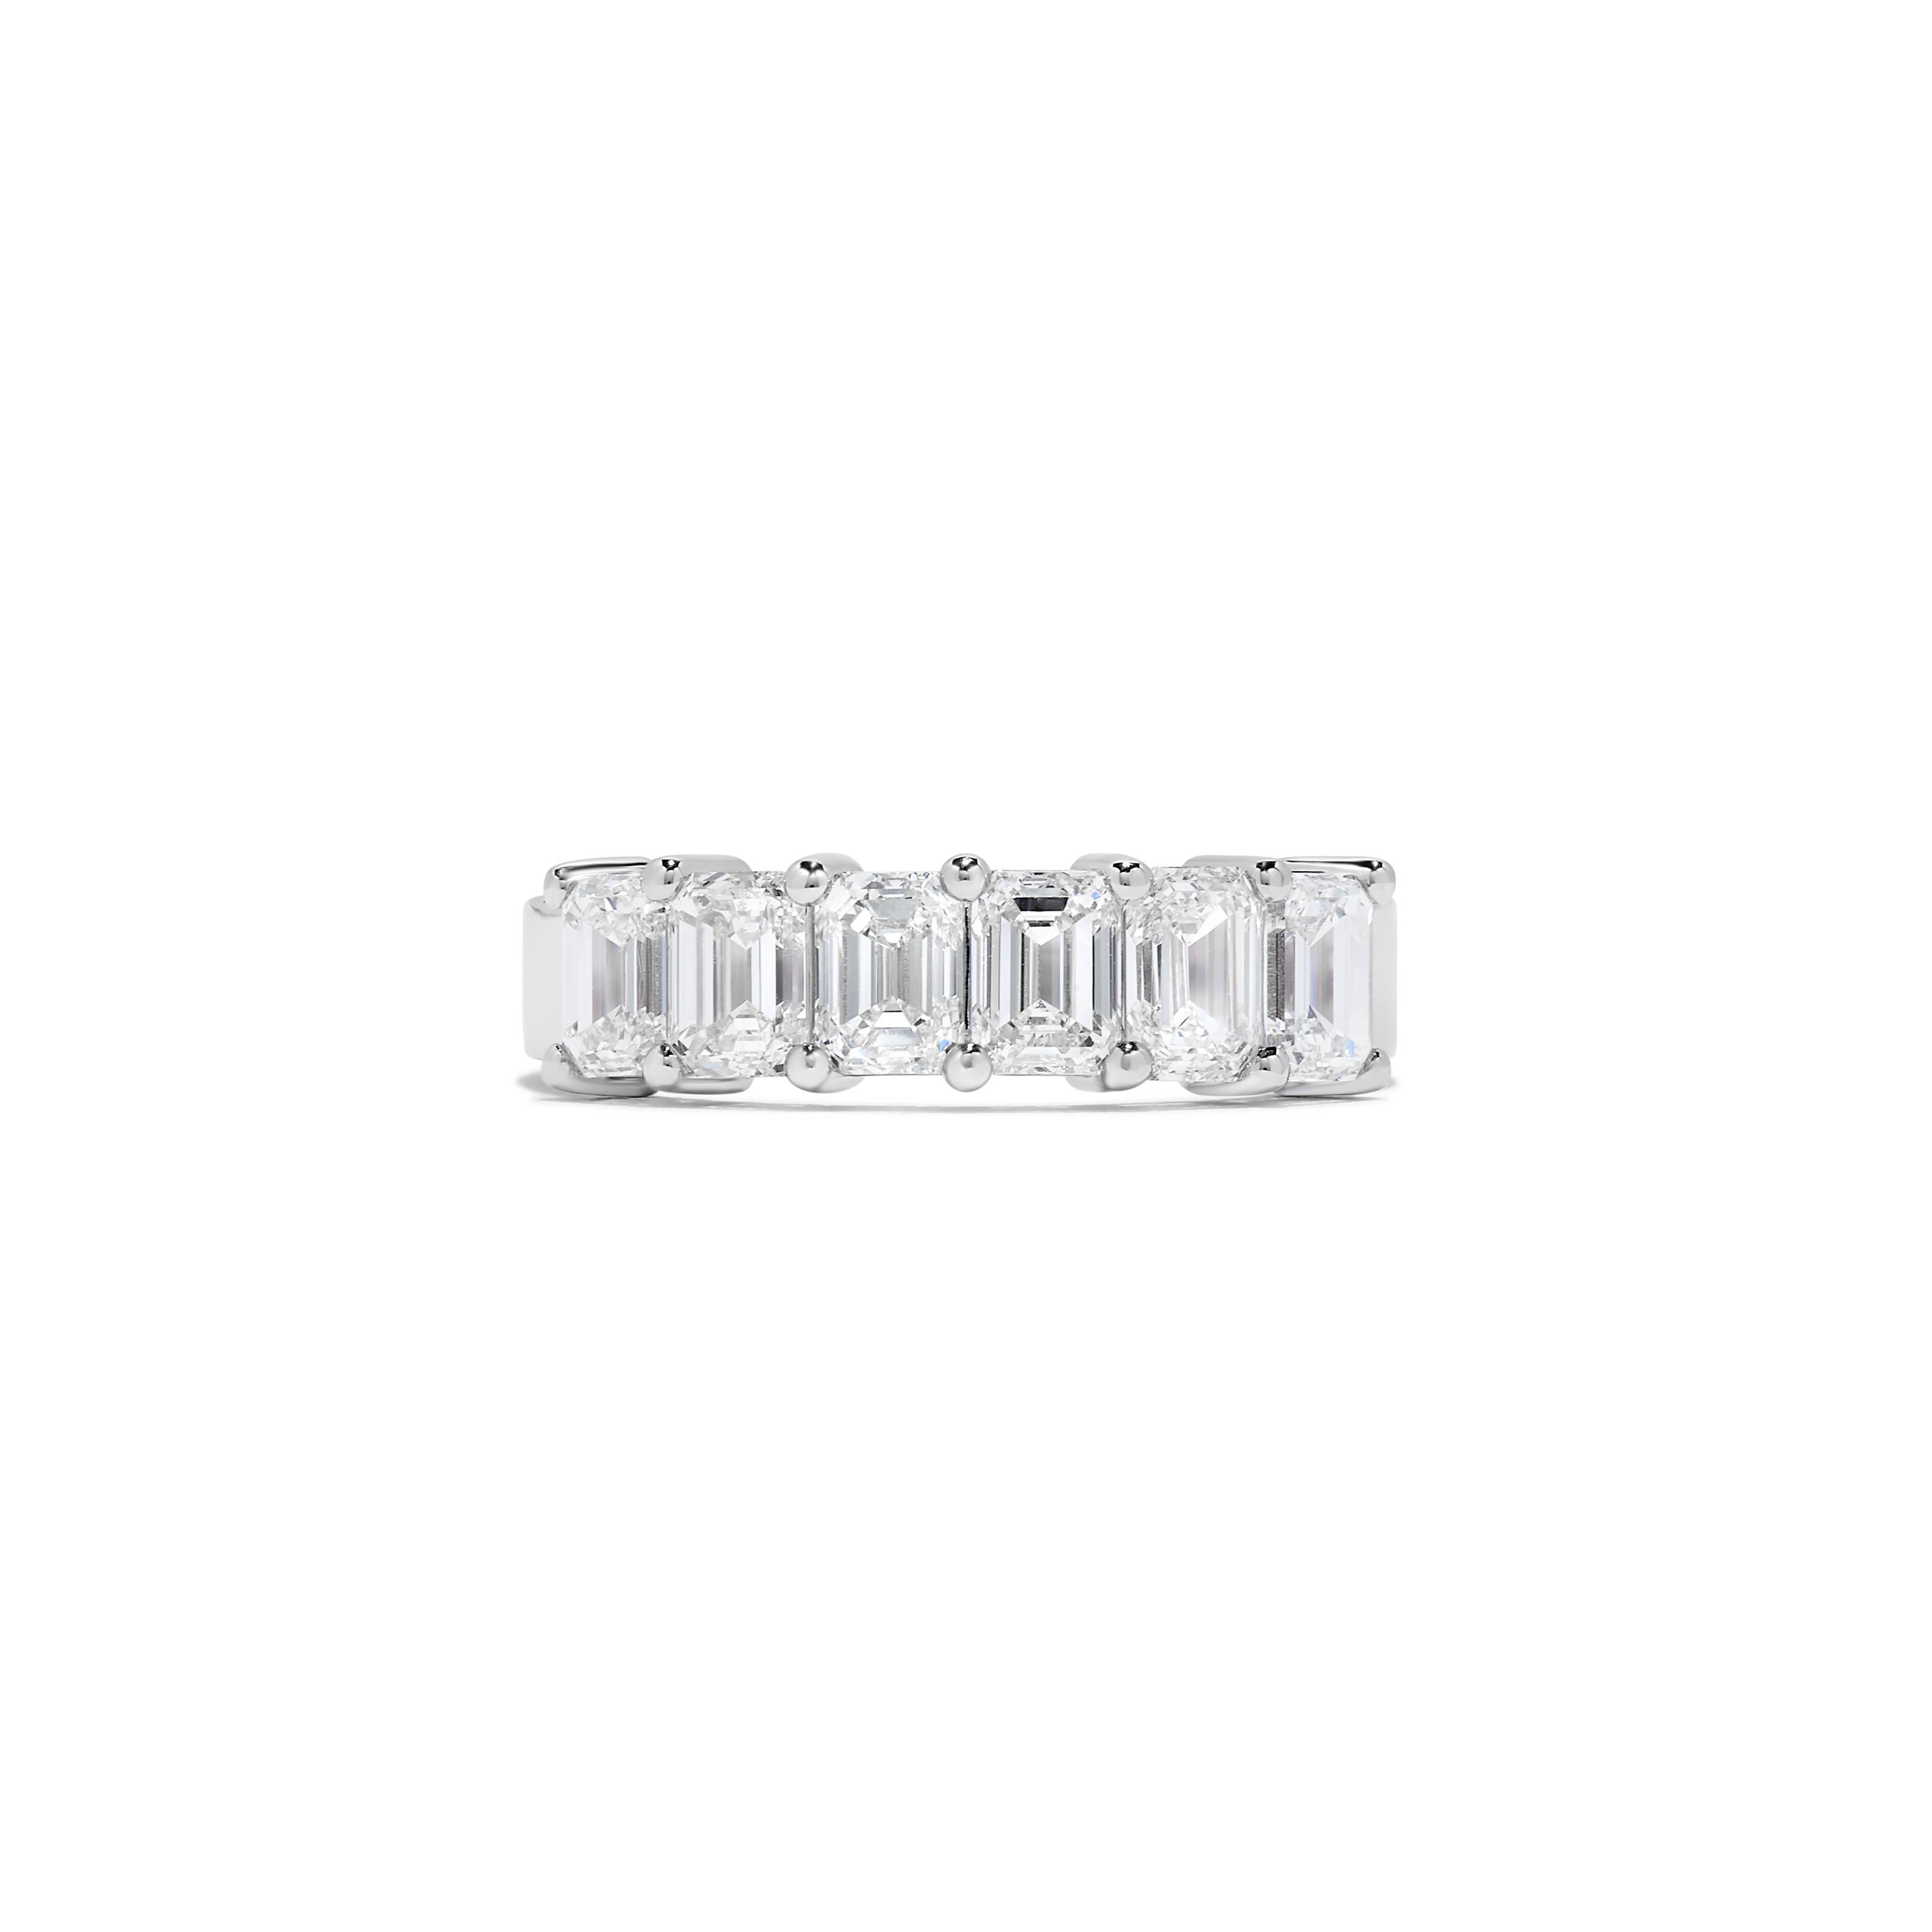 This Emerald Cut Diamond Ring features 6 graduated GIA Certified H-J VS-VVS Diamonds weighing 0.39 -0.41 carats each for a total of 2.35 carats all set in Platinum. 

